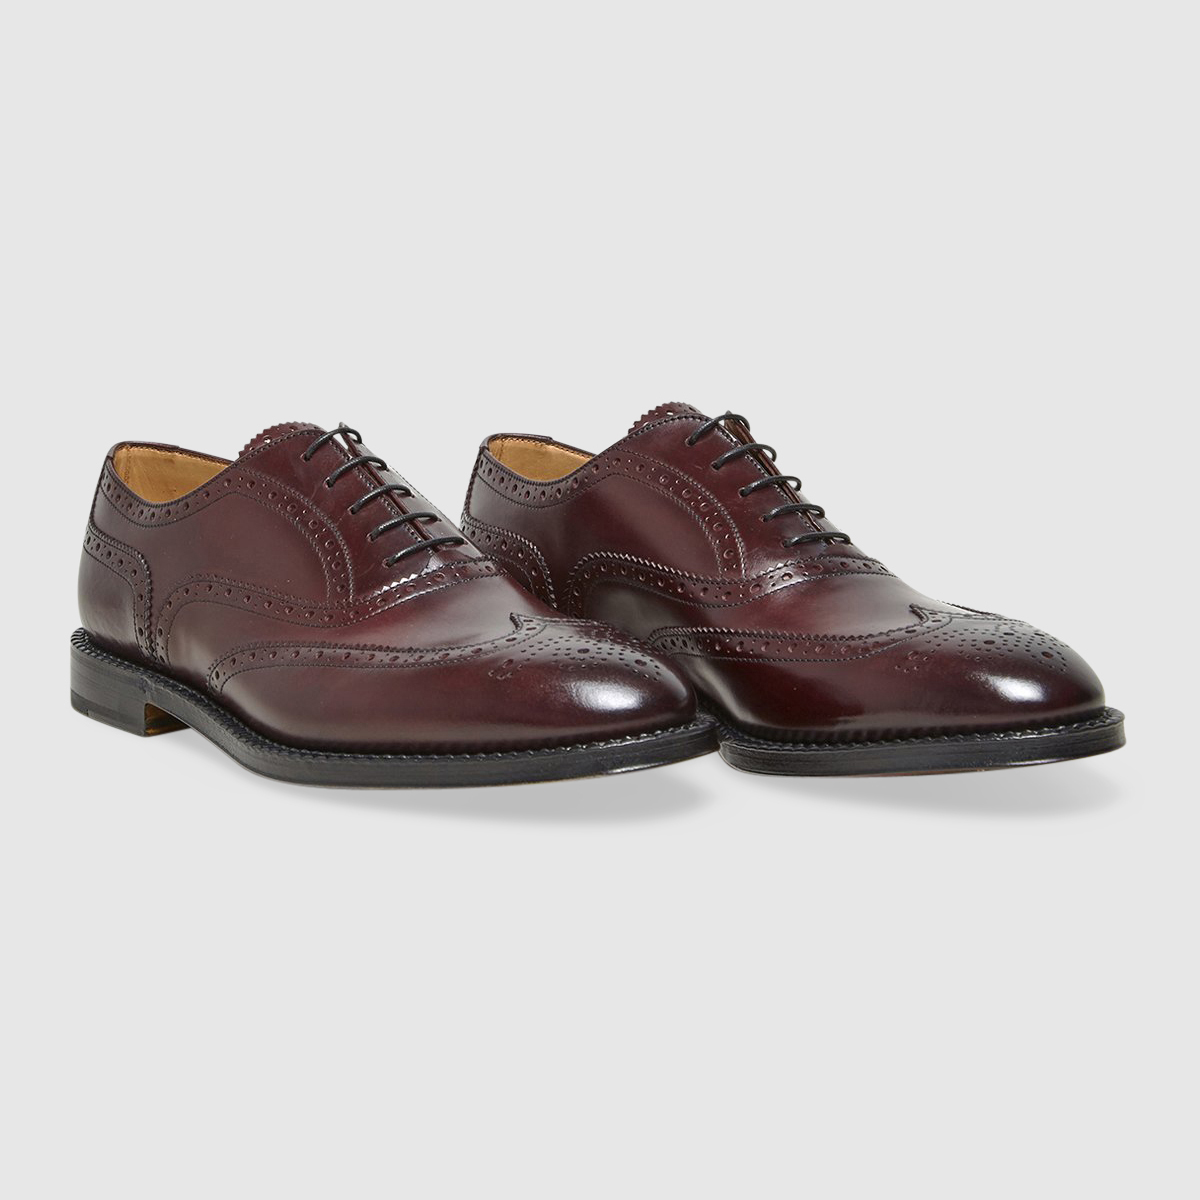 Lace-up Shoes in Bordeaux Brogue Calfskin Gruppo Fabi on sale 2022 2